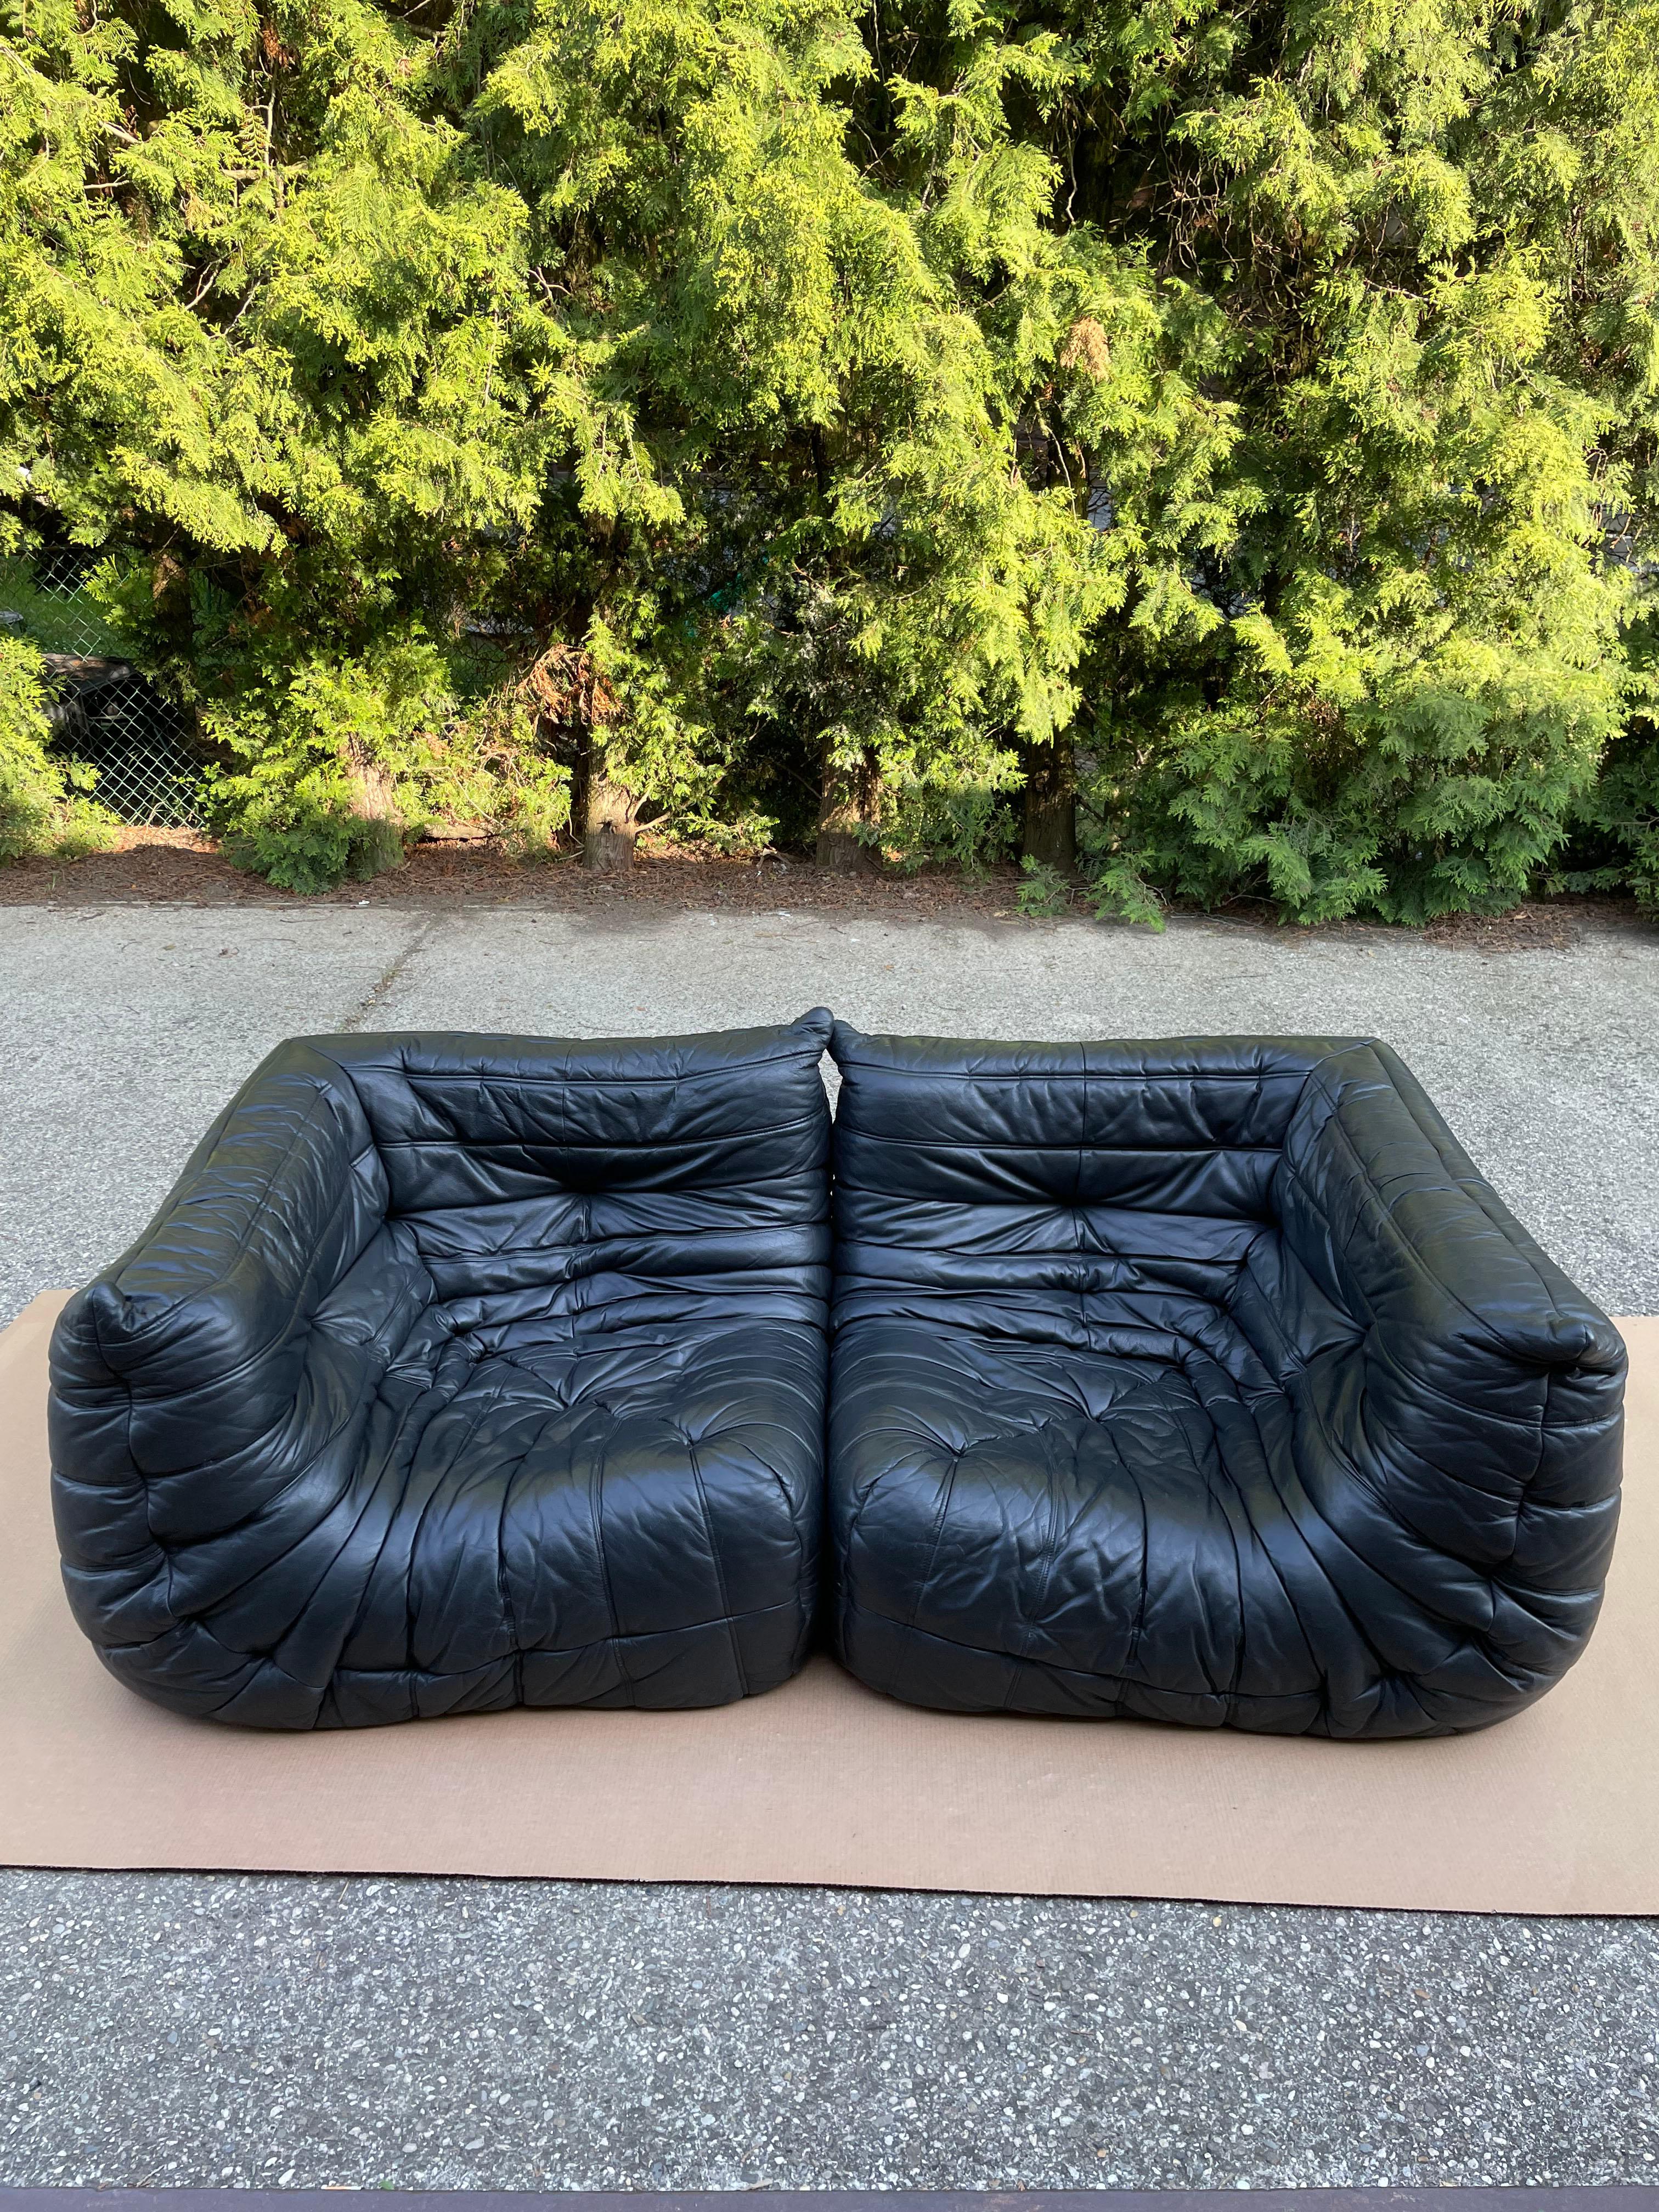 The Togo sofa is a true design classic designed by notable French designer Michel Ducaroy for the high-end furniture maker Ligne Roset in 1973. 

Offered for sale is a pair of Togo corner seats in black leather in great original condition
This is